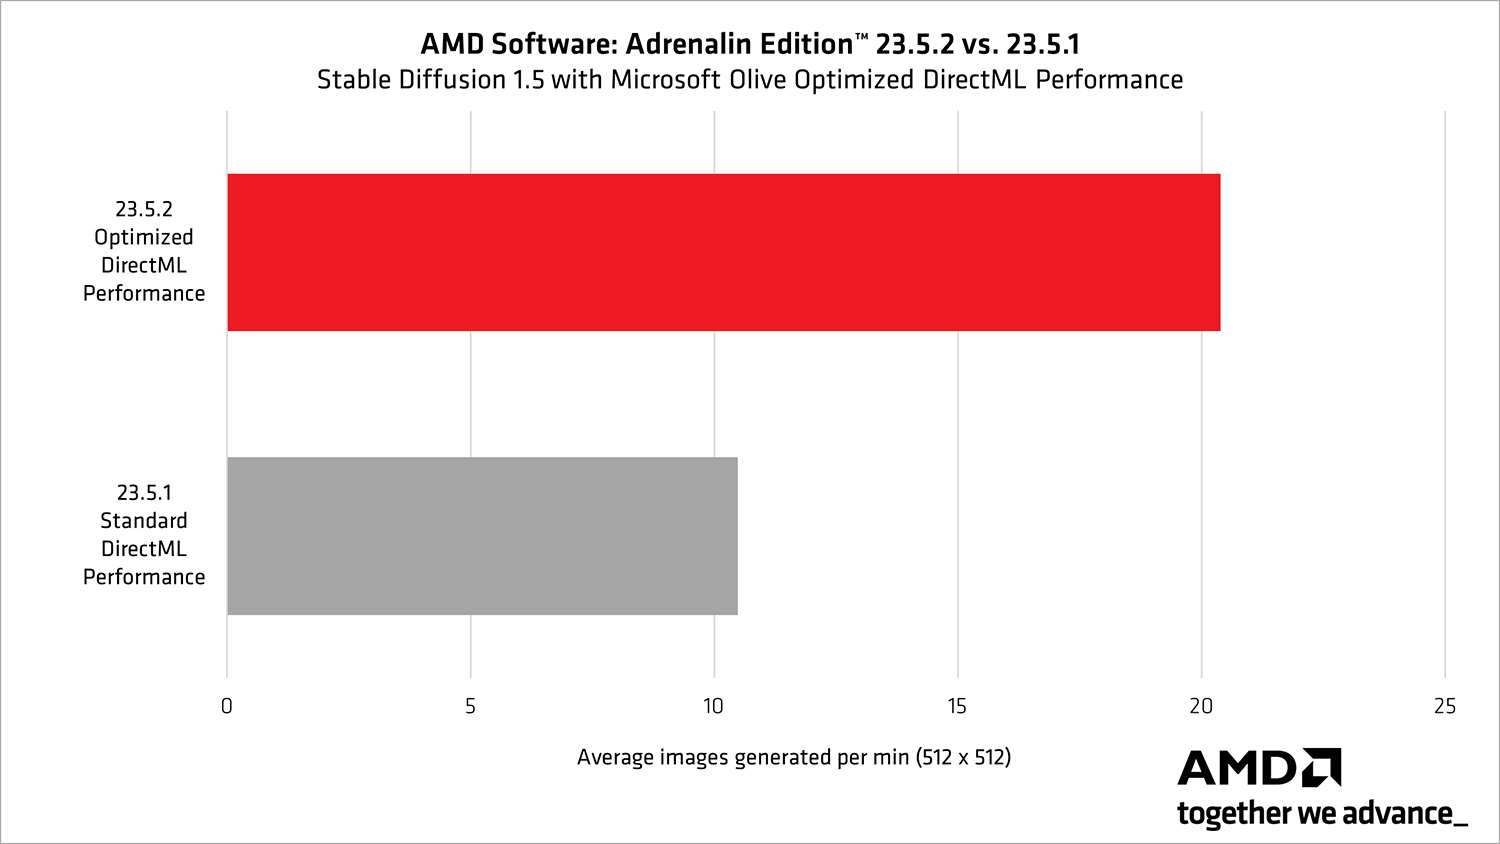 Comparison of AMD Software: Adrenalin Edition 23.5.2 vs 23.5.1 for Stable Diffusion 1.5 with Microsoft Olive Optimized DirectML performance. 23.5.2 shows 19 average 512x512 images generated per minute and 23.5.1 shows 10.